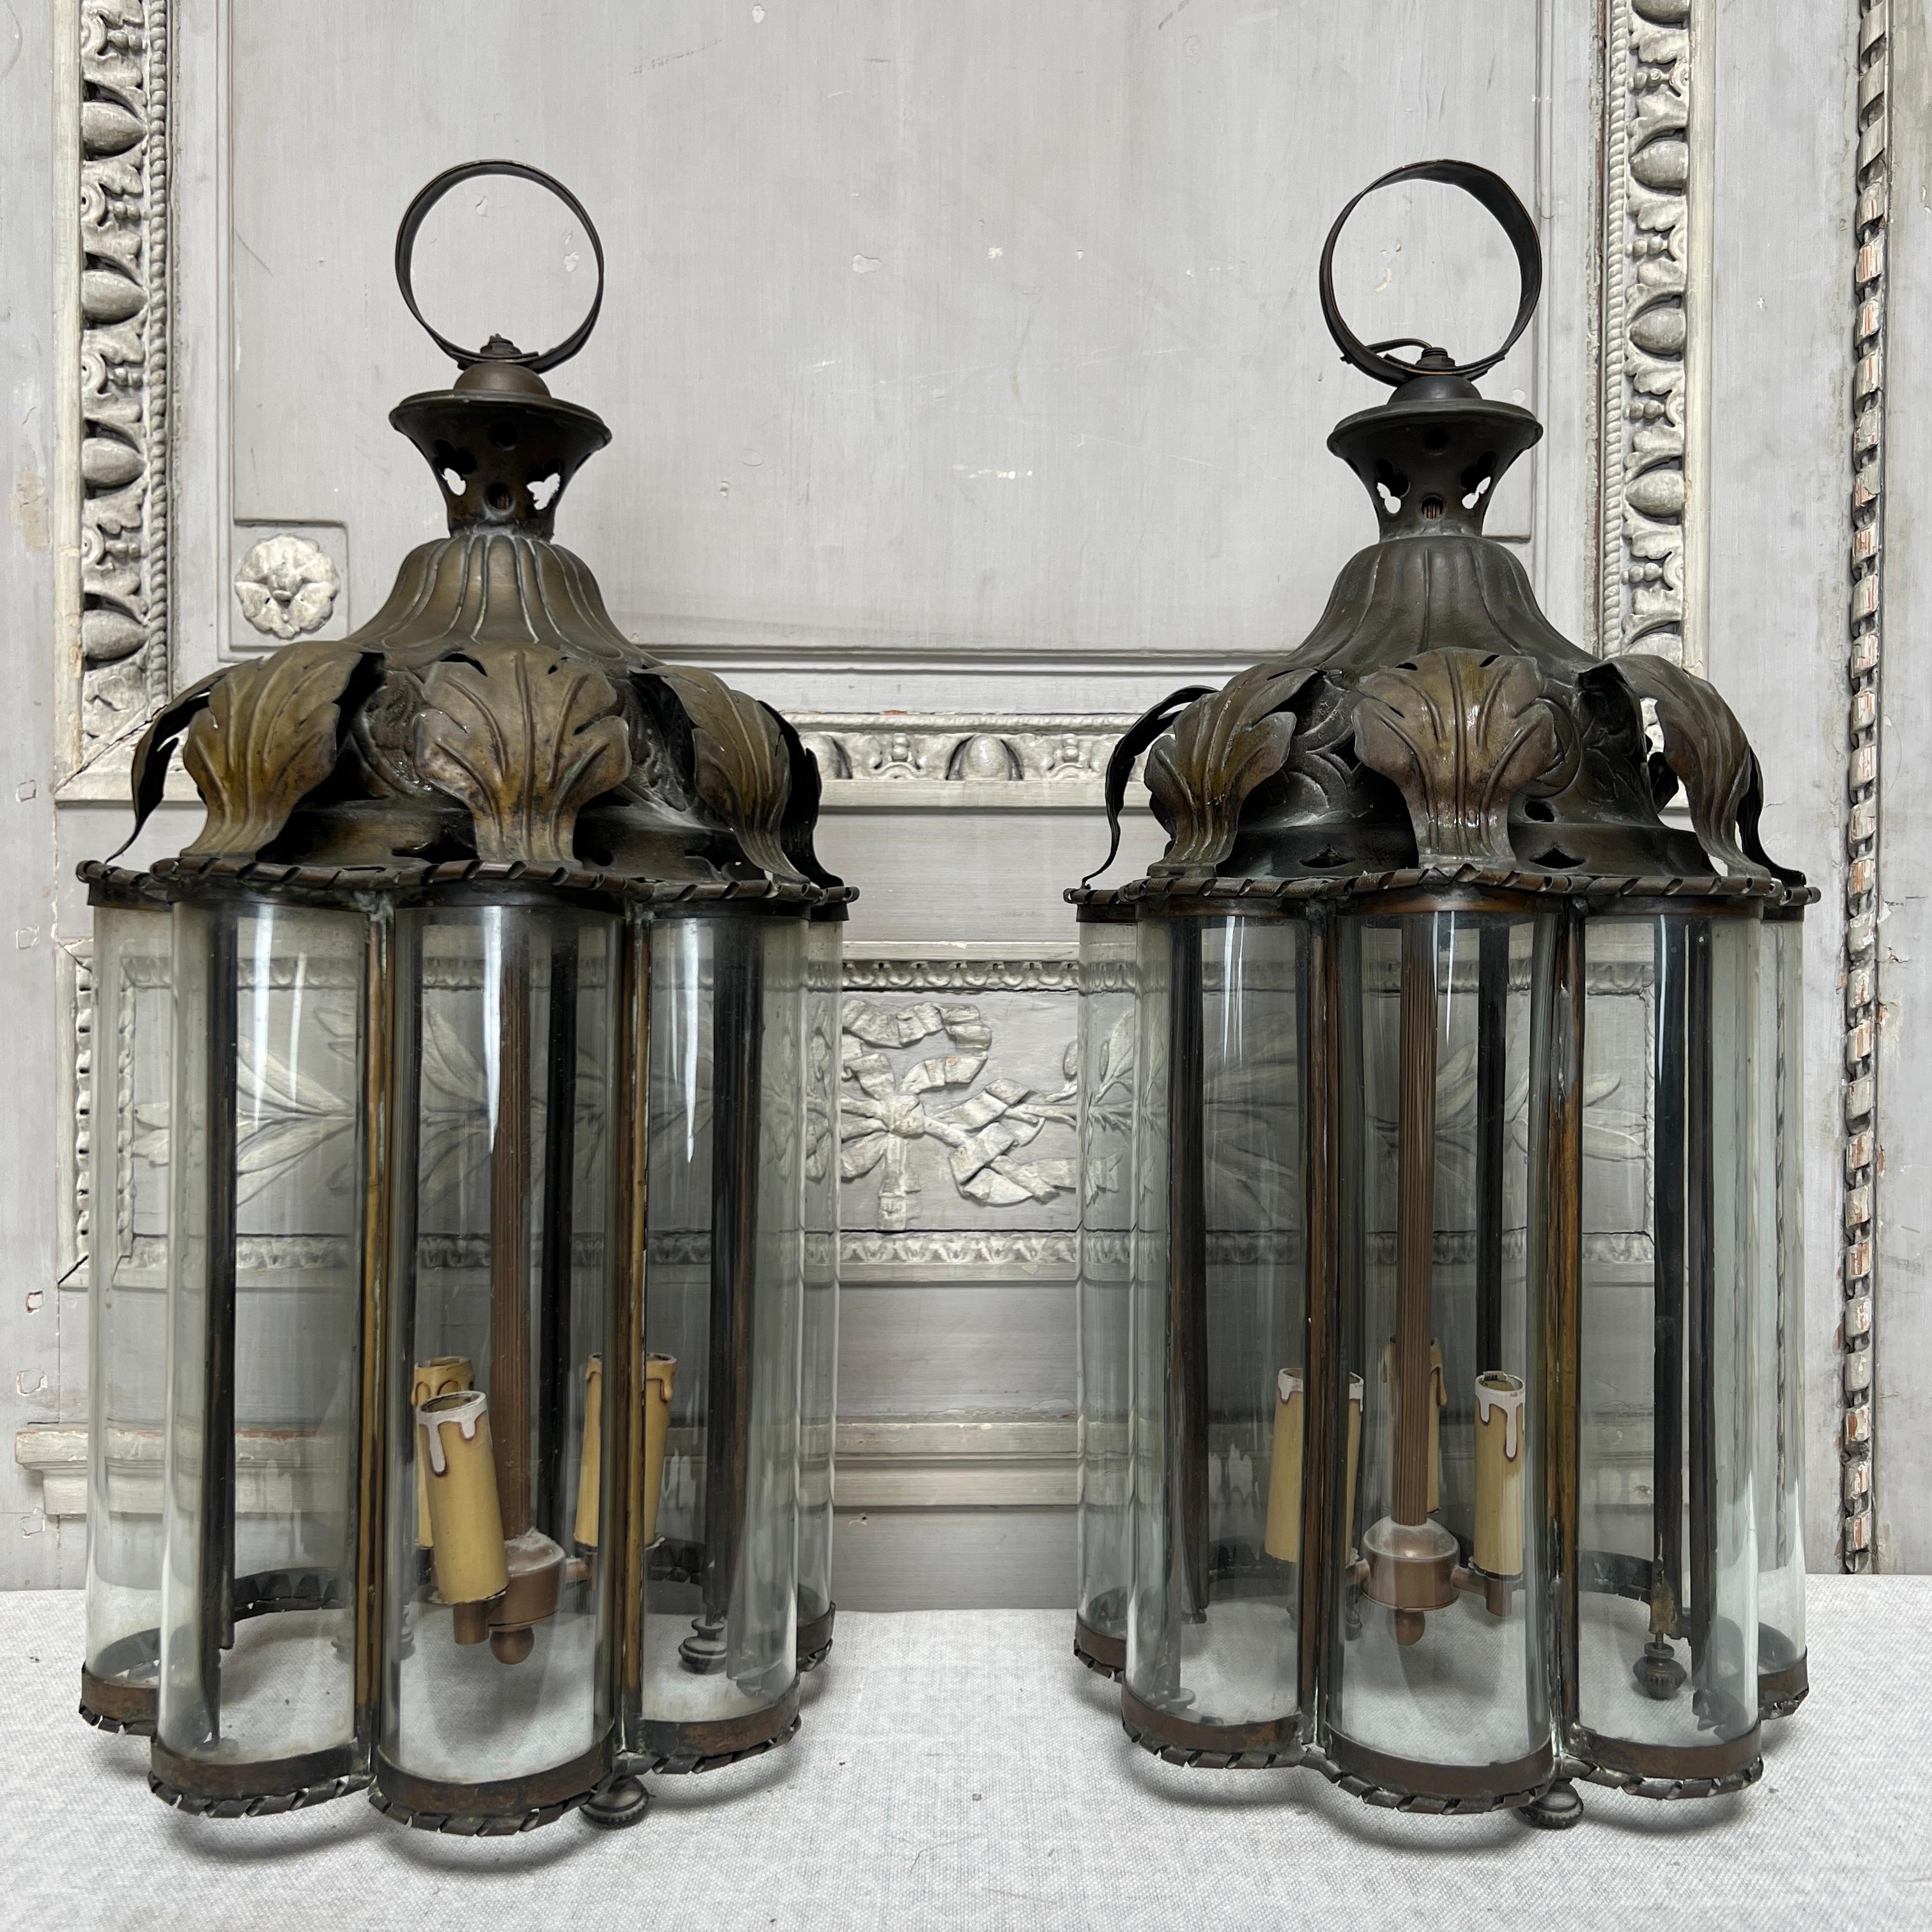 A very unusual pair of French brass and glass lanterns from the early 20th century. These lanterns are made of repousse and hammered, brass or bronze with gadrooning and acanthus leaves. This metal work is housing eight semicircular vertical glass